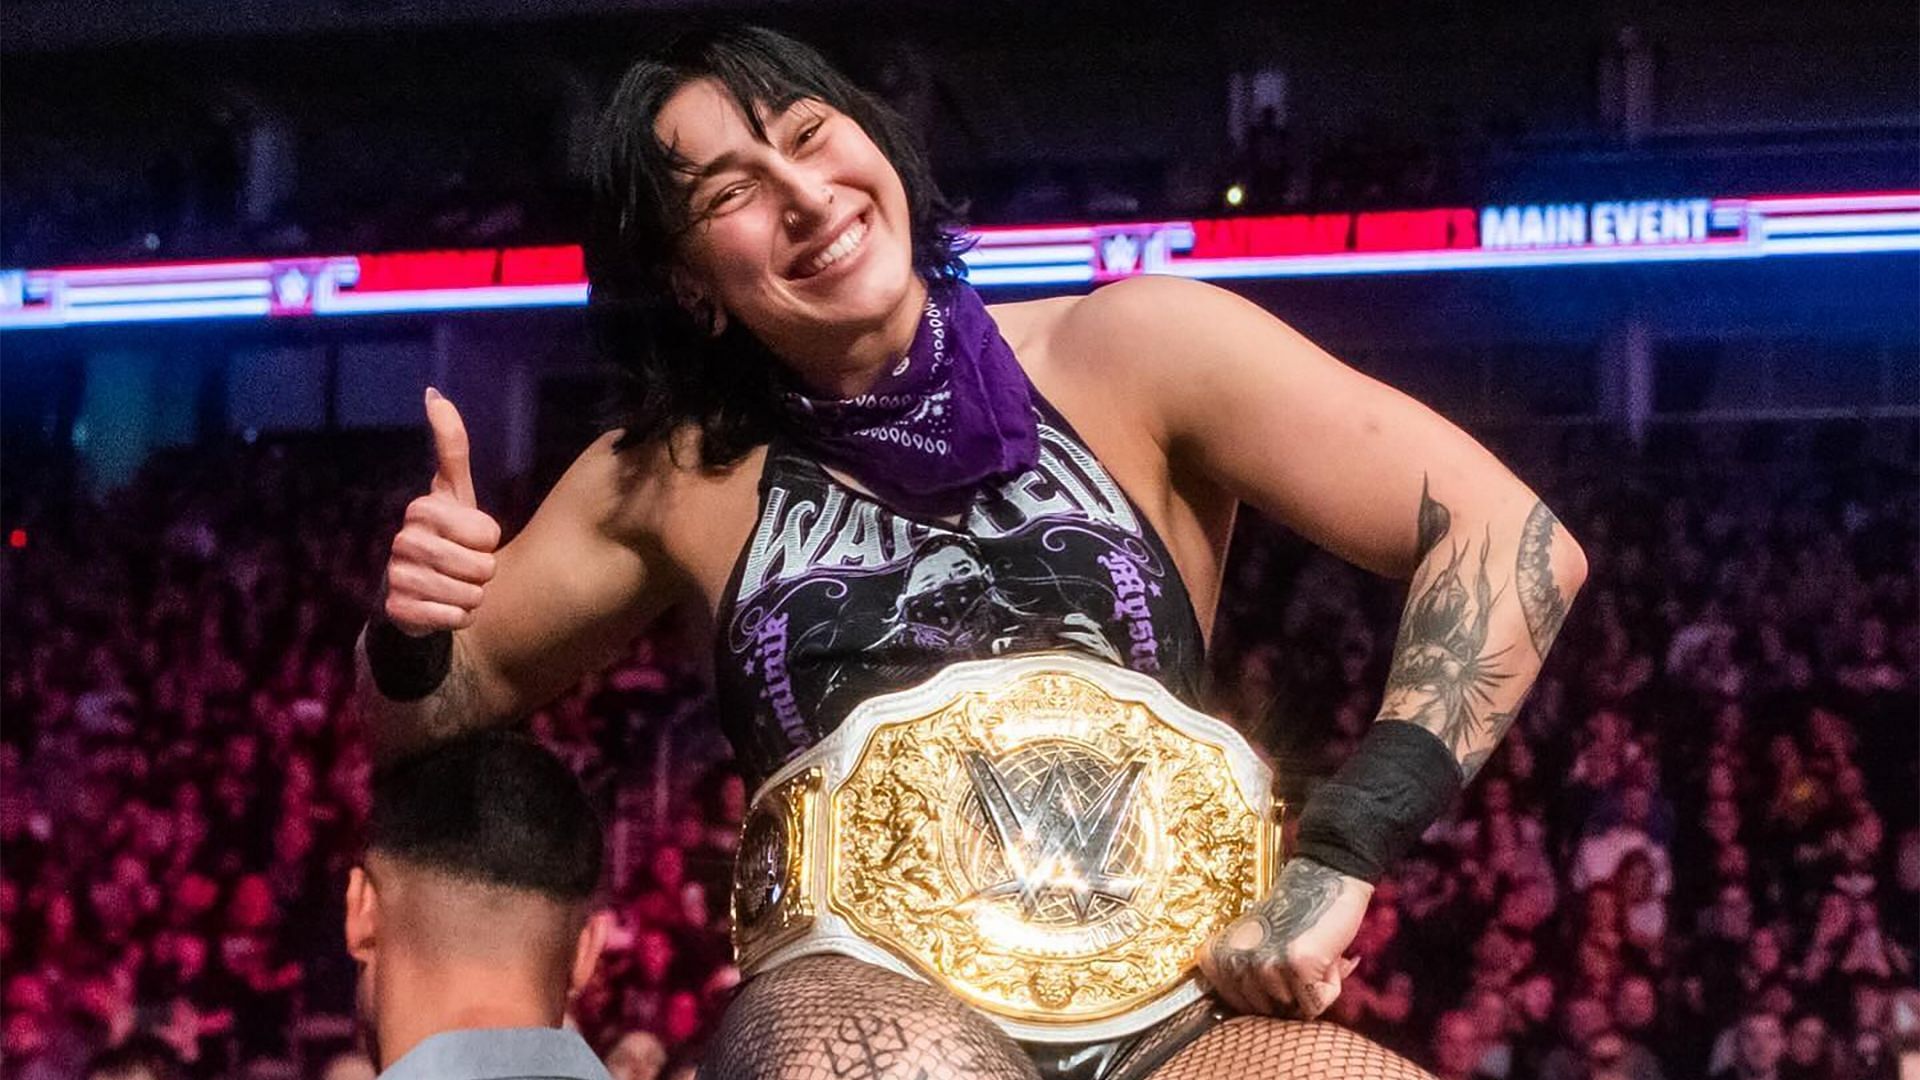 Rhea Ripley is all smiles with the WWE World Women